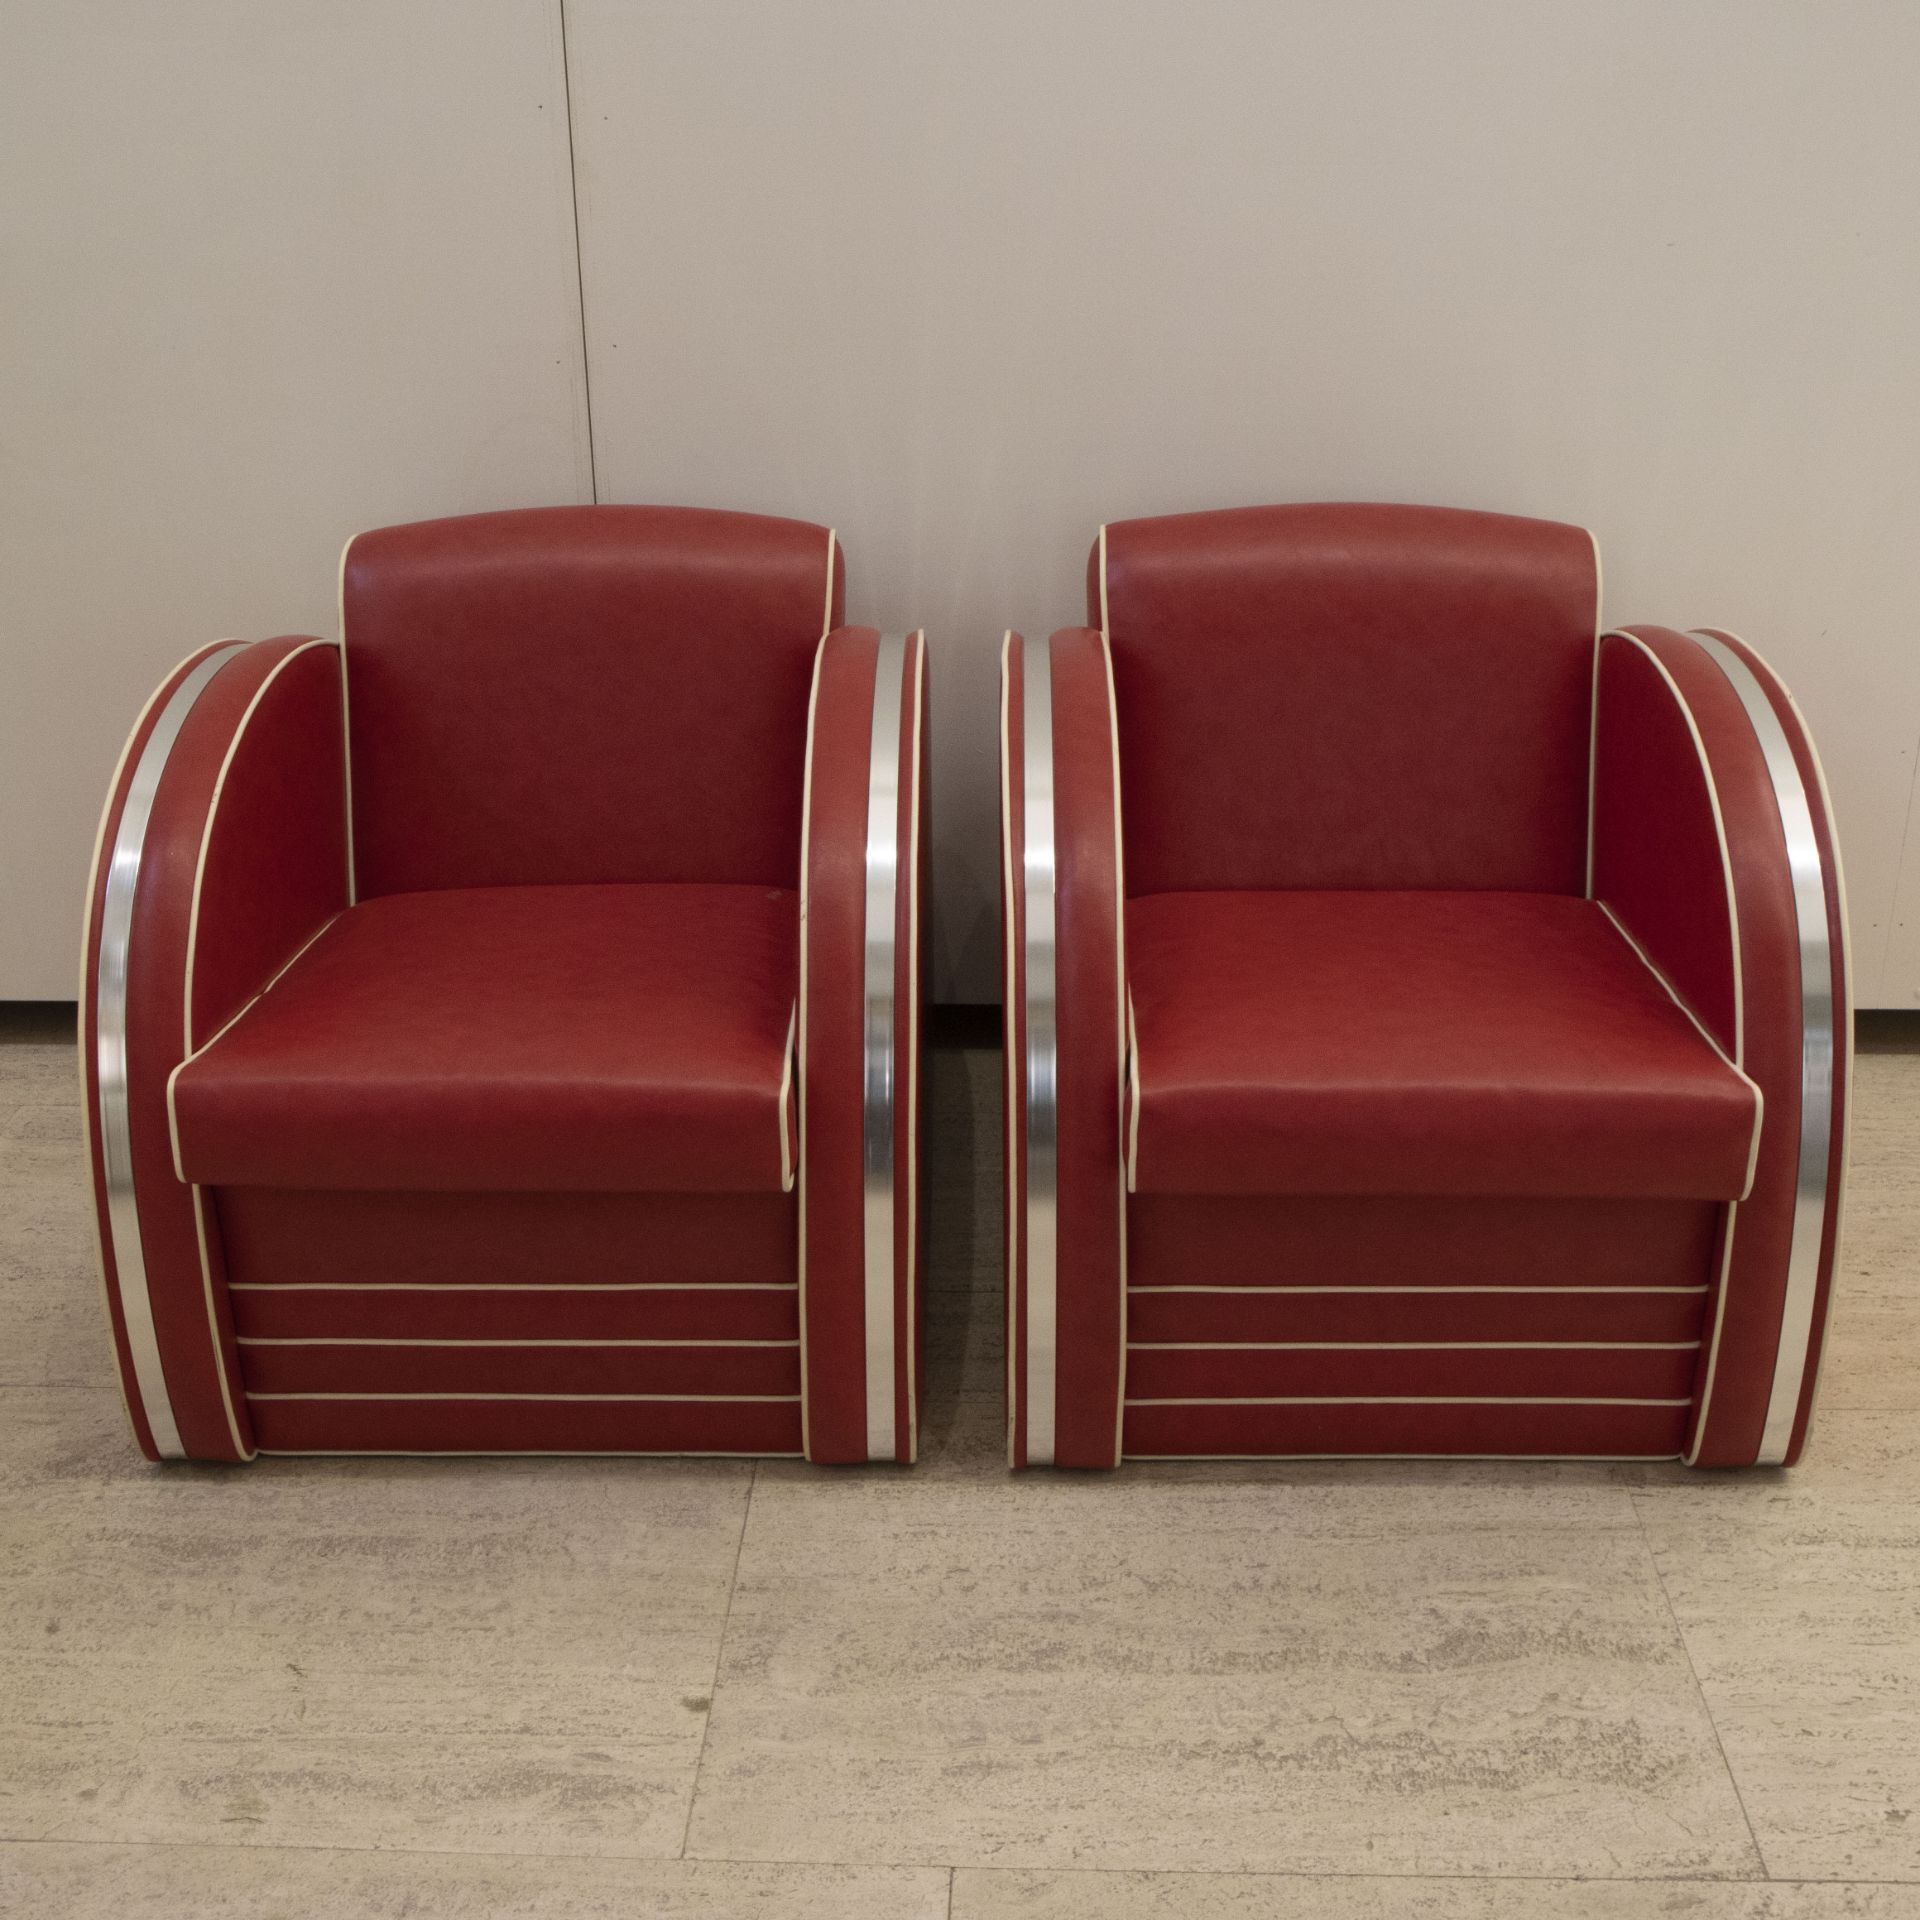 2 Art Deco vintage red seats with aluminum